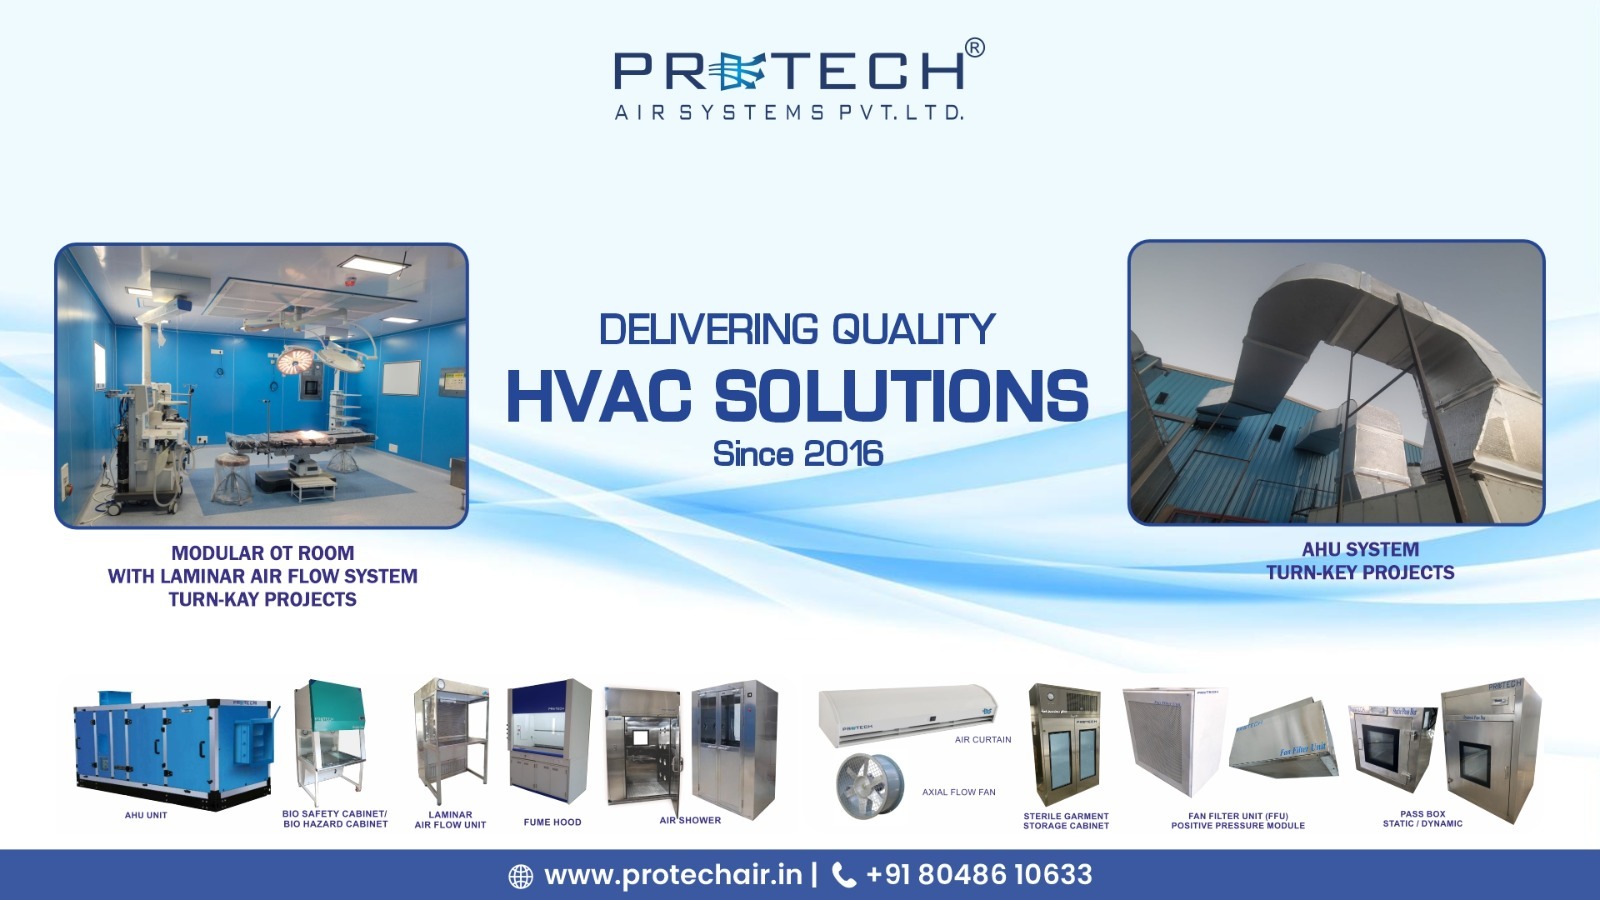 Protechair Systems Private Limited: Delivering Quality HVAC Solutions Since 2016